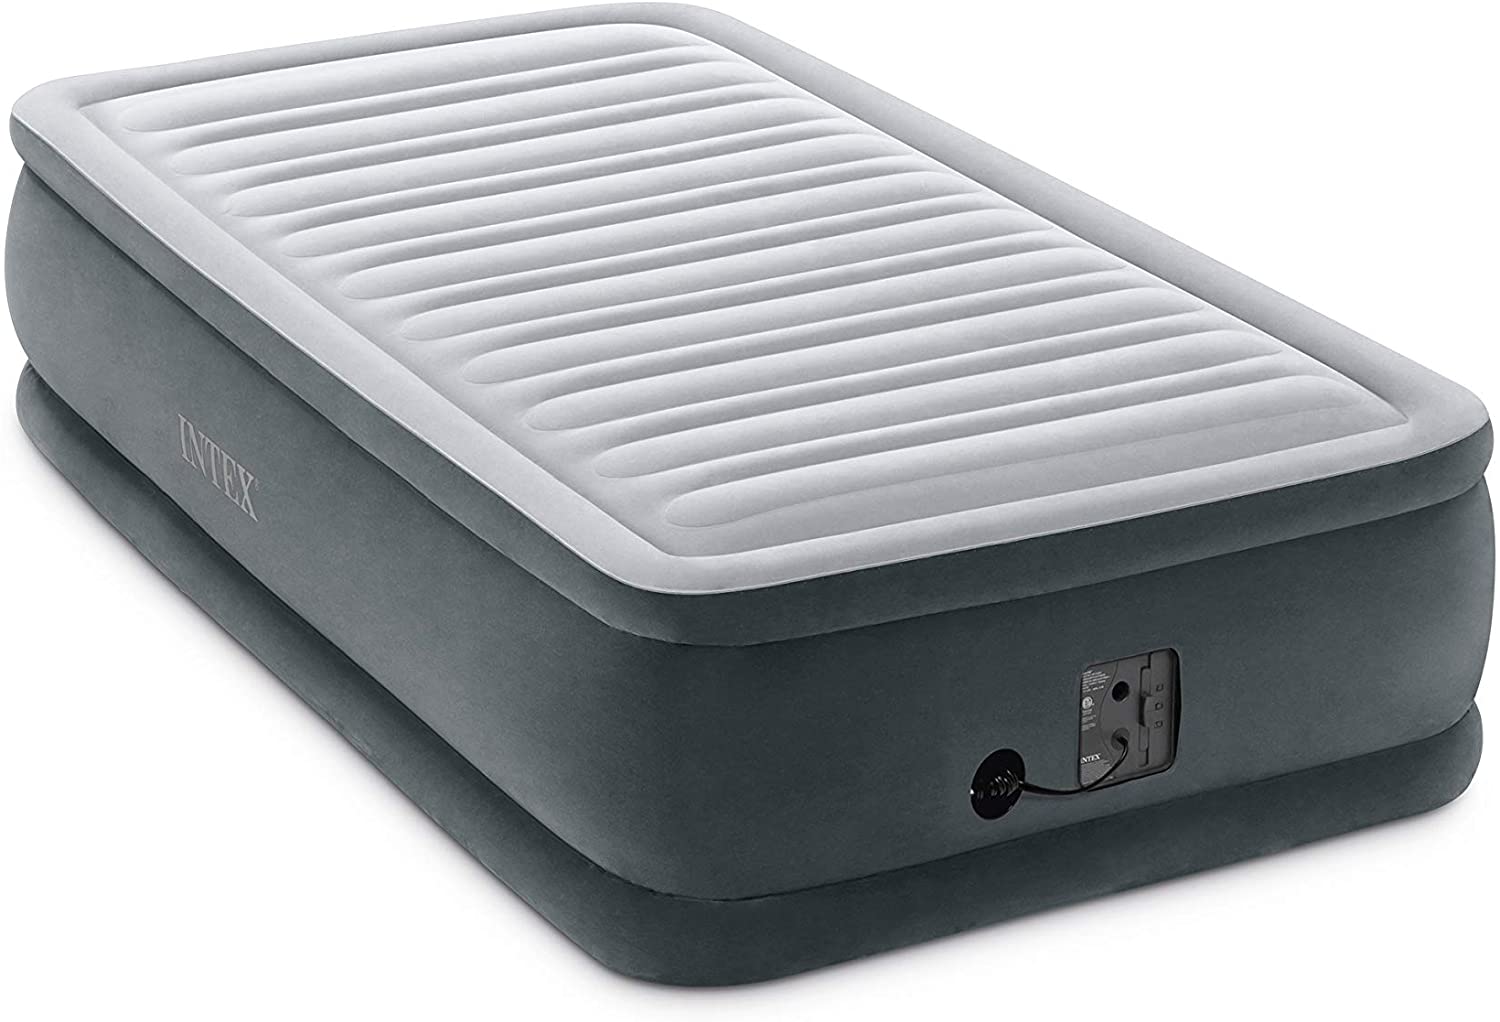 This single-tall air bed would  be suitable for indoor and outdoor use, by people of average weight.  